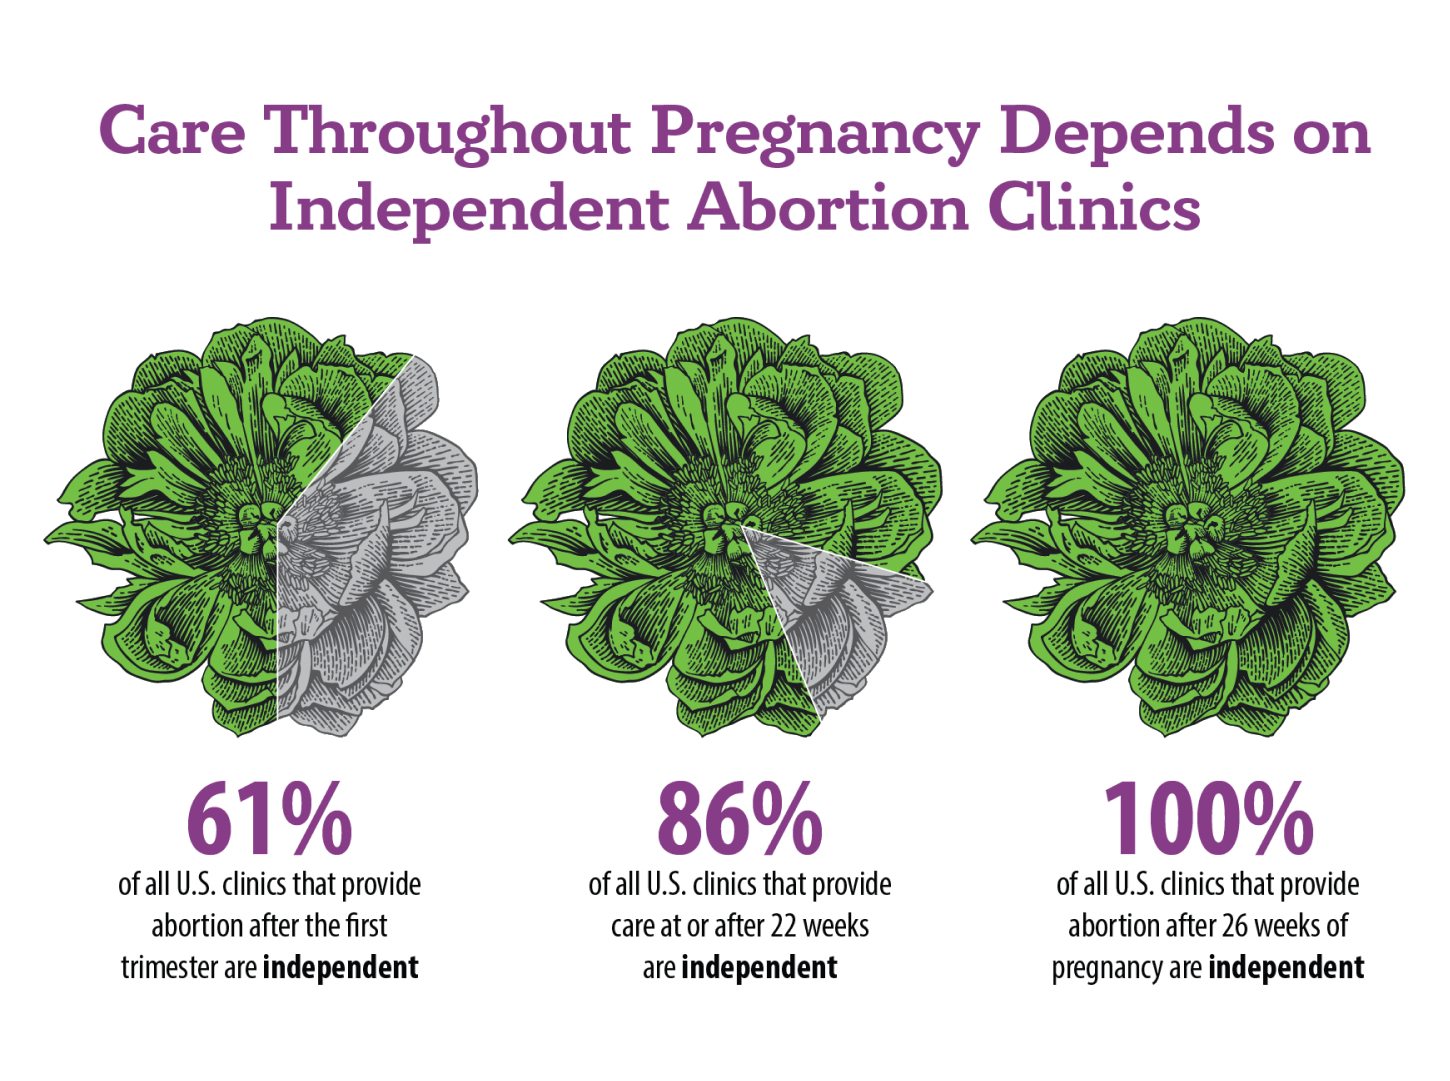 A set of three pie charts titled: Care Throughout Pregnancy Depends on Independent Abortion Clinics. The pie charts are linocut illustrations of a flower head divided into pieces to represent the percentages.A set of three pie charts titled: Care Throughout Pregnancy Depends on Independent Abortion Clinics. The pie charts are linocut illustrations of a flower head divided into pieces to represent the percentages.